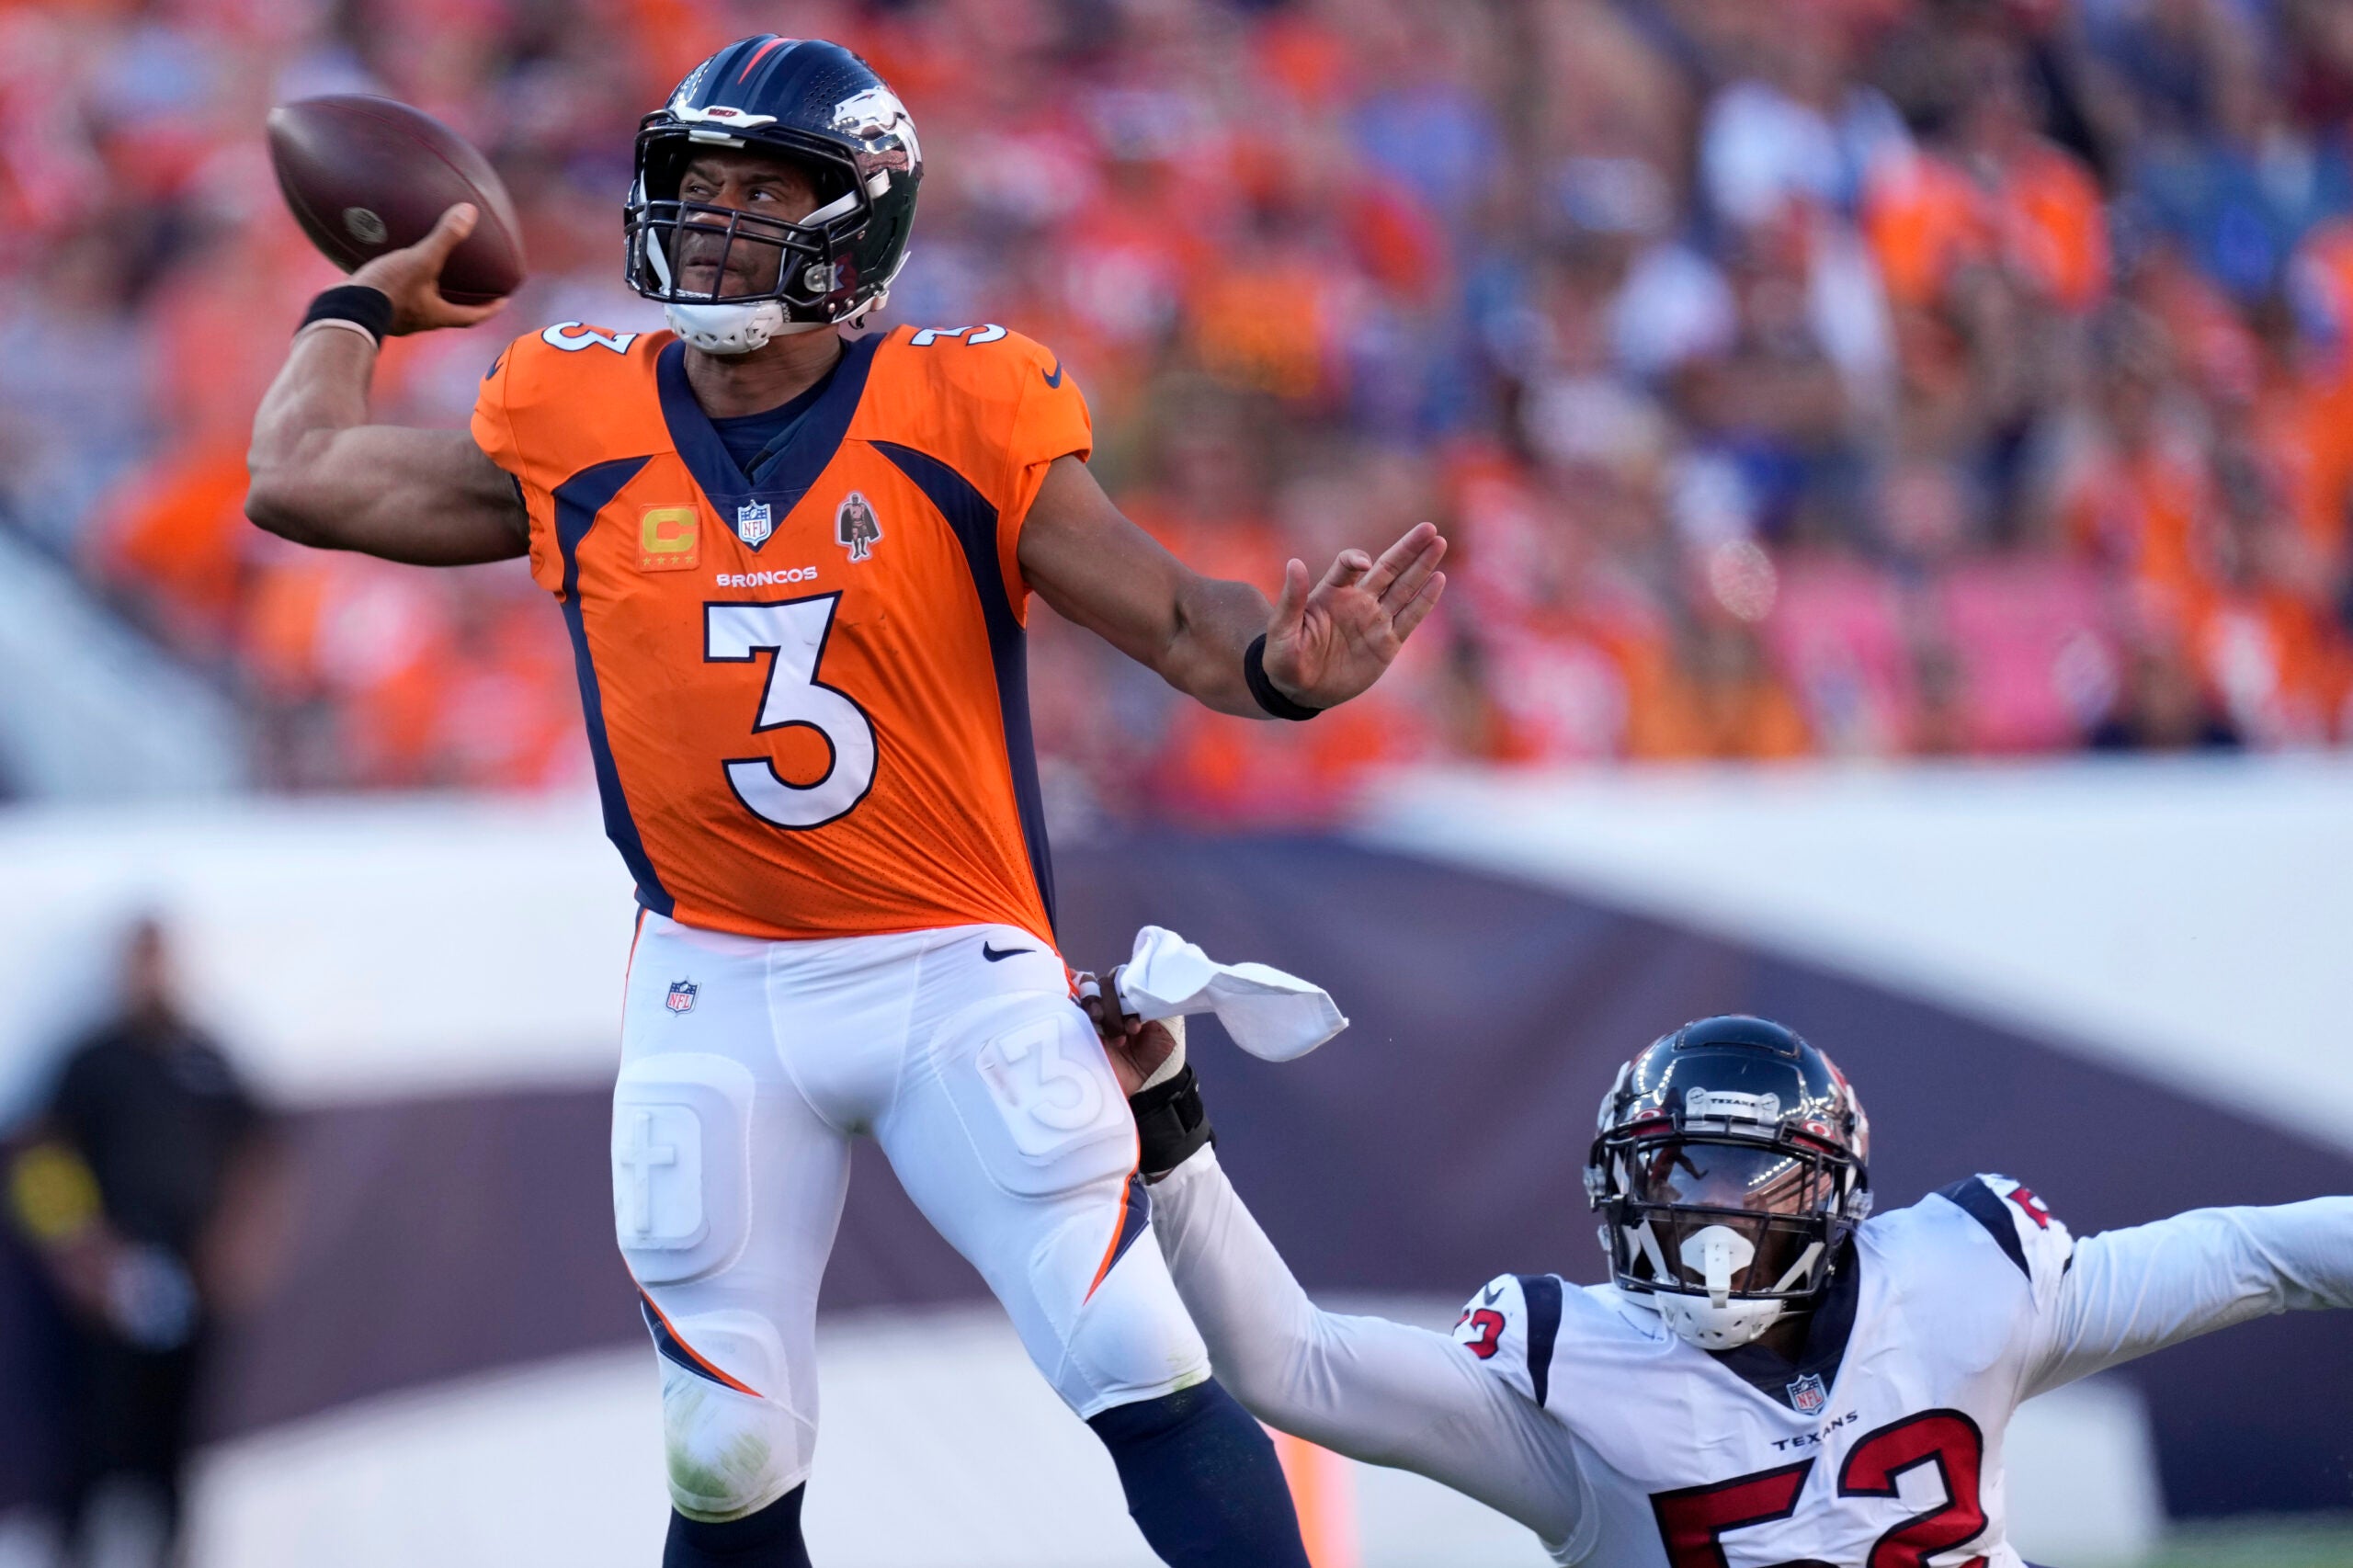 Denver Broncos quarterback Russell Wilson (3) is pressured by Houston Texans defensive end Jonathan Greenard (52) during the second half of an NFL football game, Sunday, Sept. 18, 2022, in Denver.